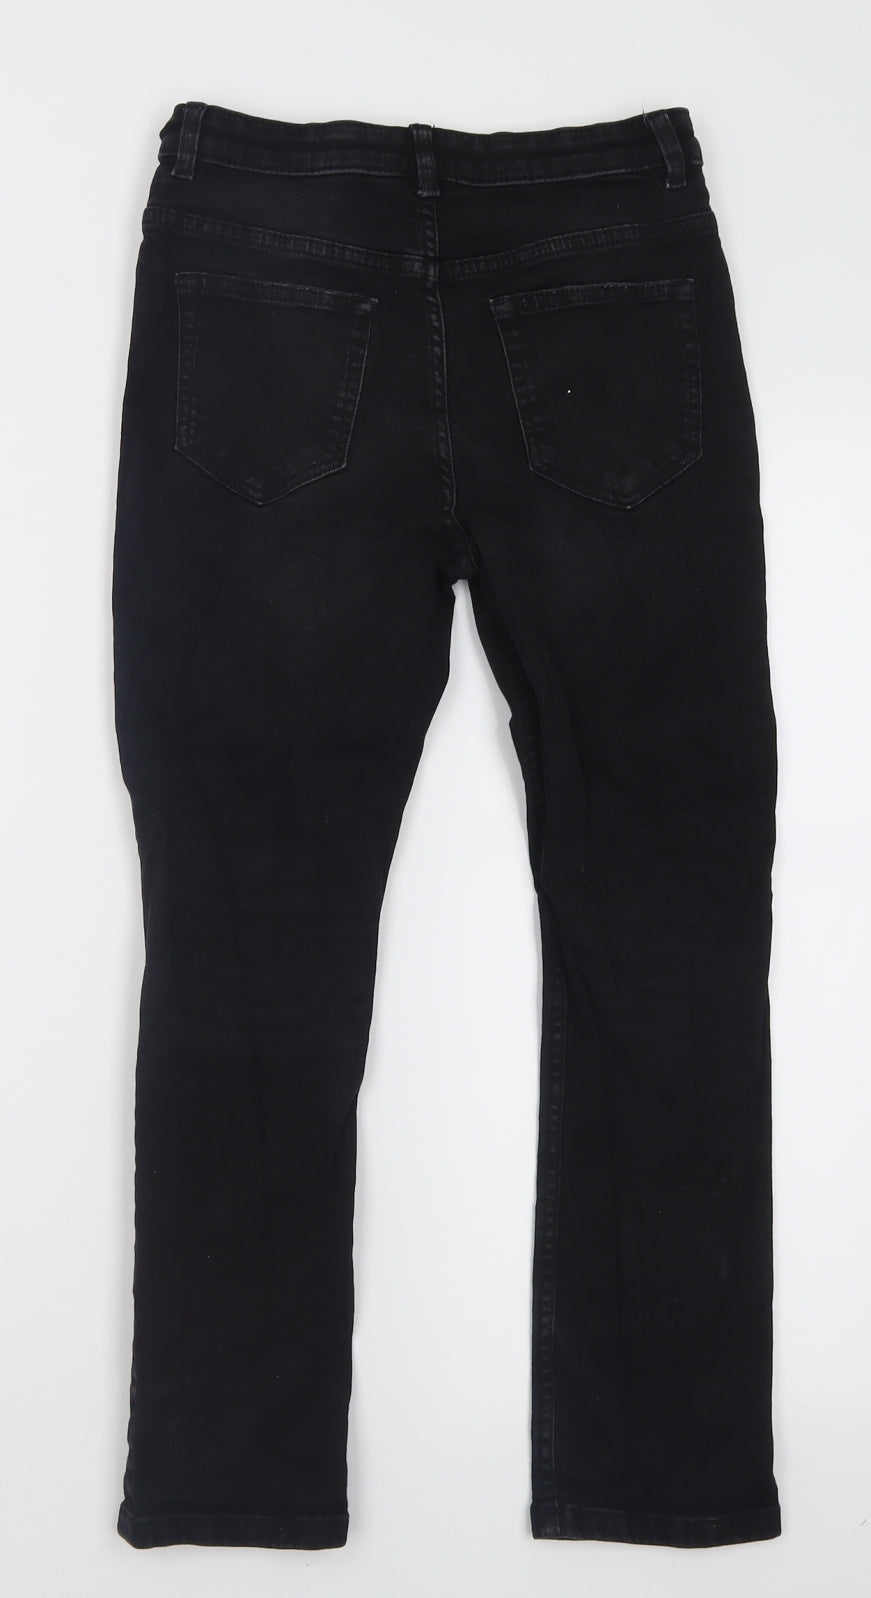 Marks and Spencer Girls Black  Cotton Straight Jeans Size 9 Years  Regular Button